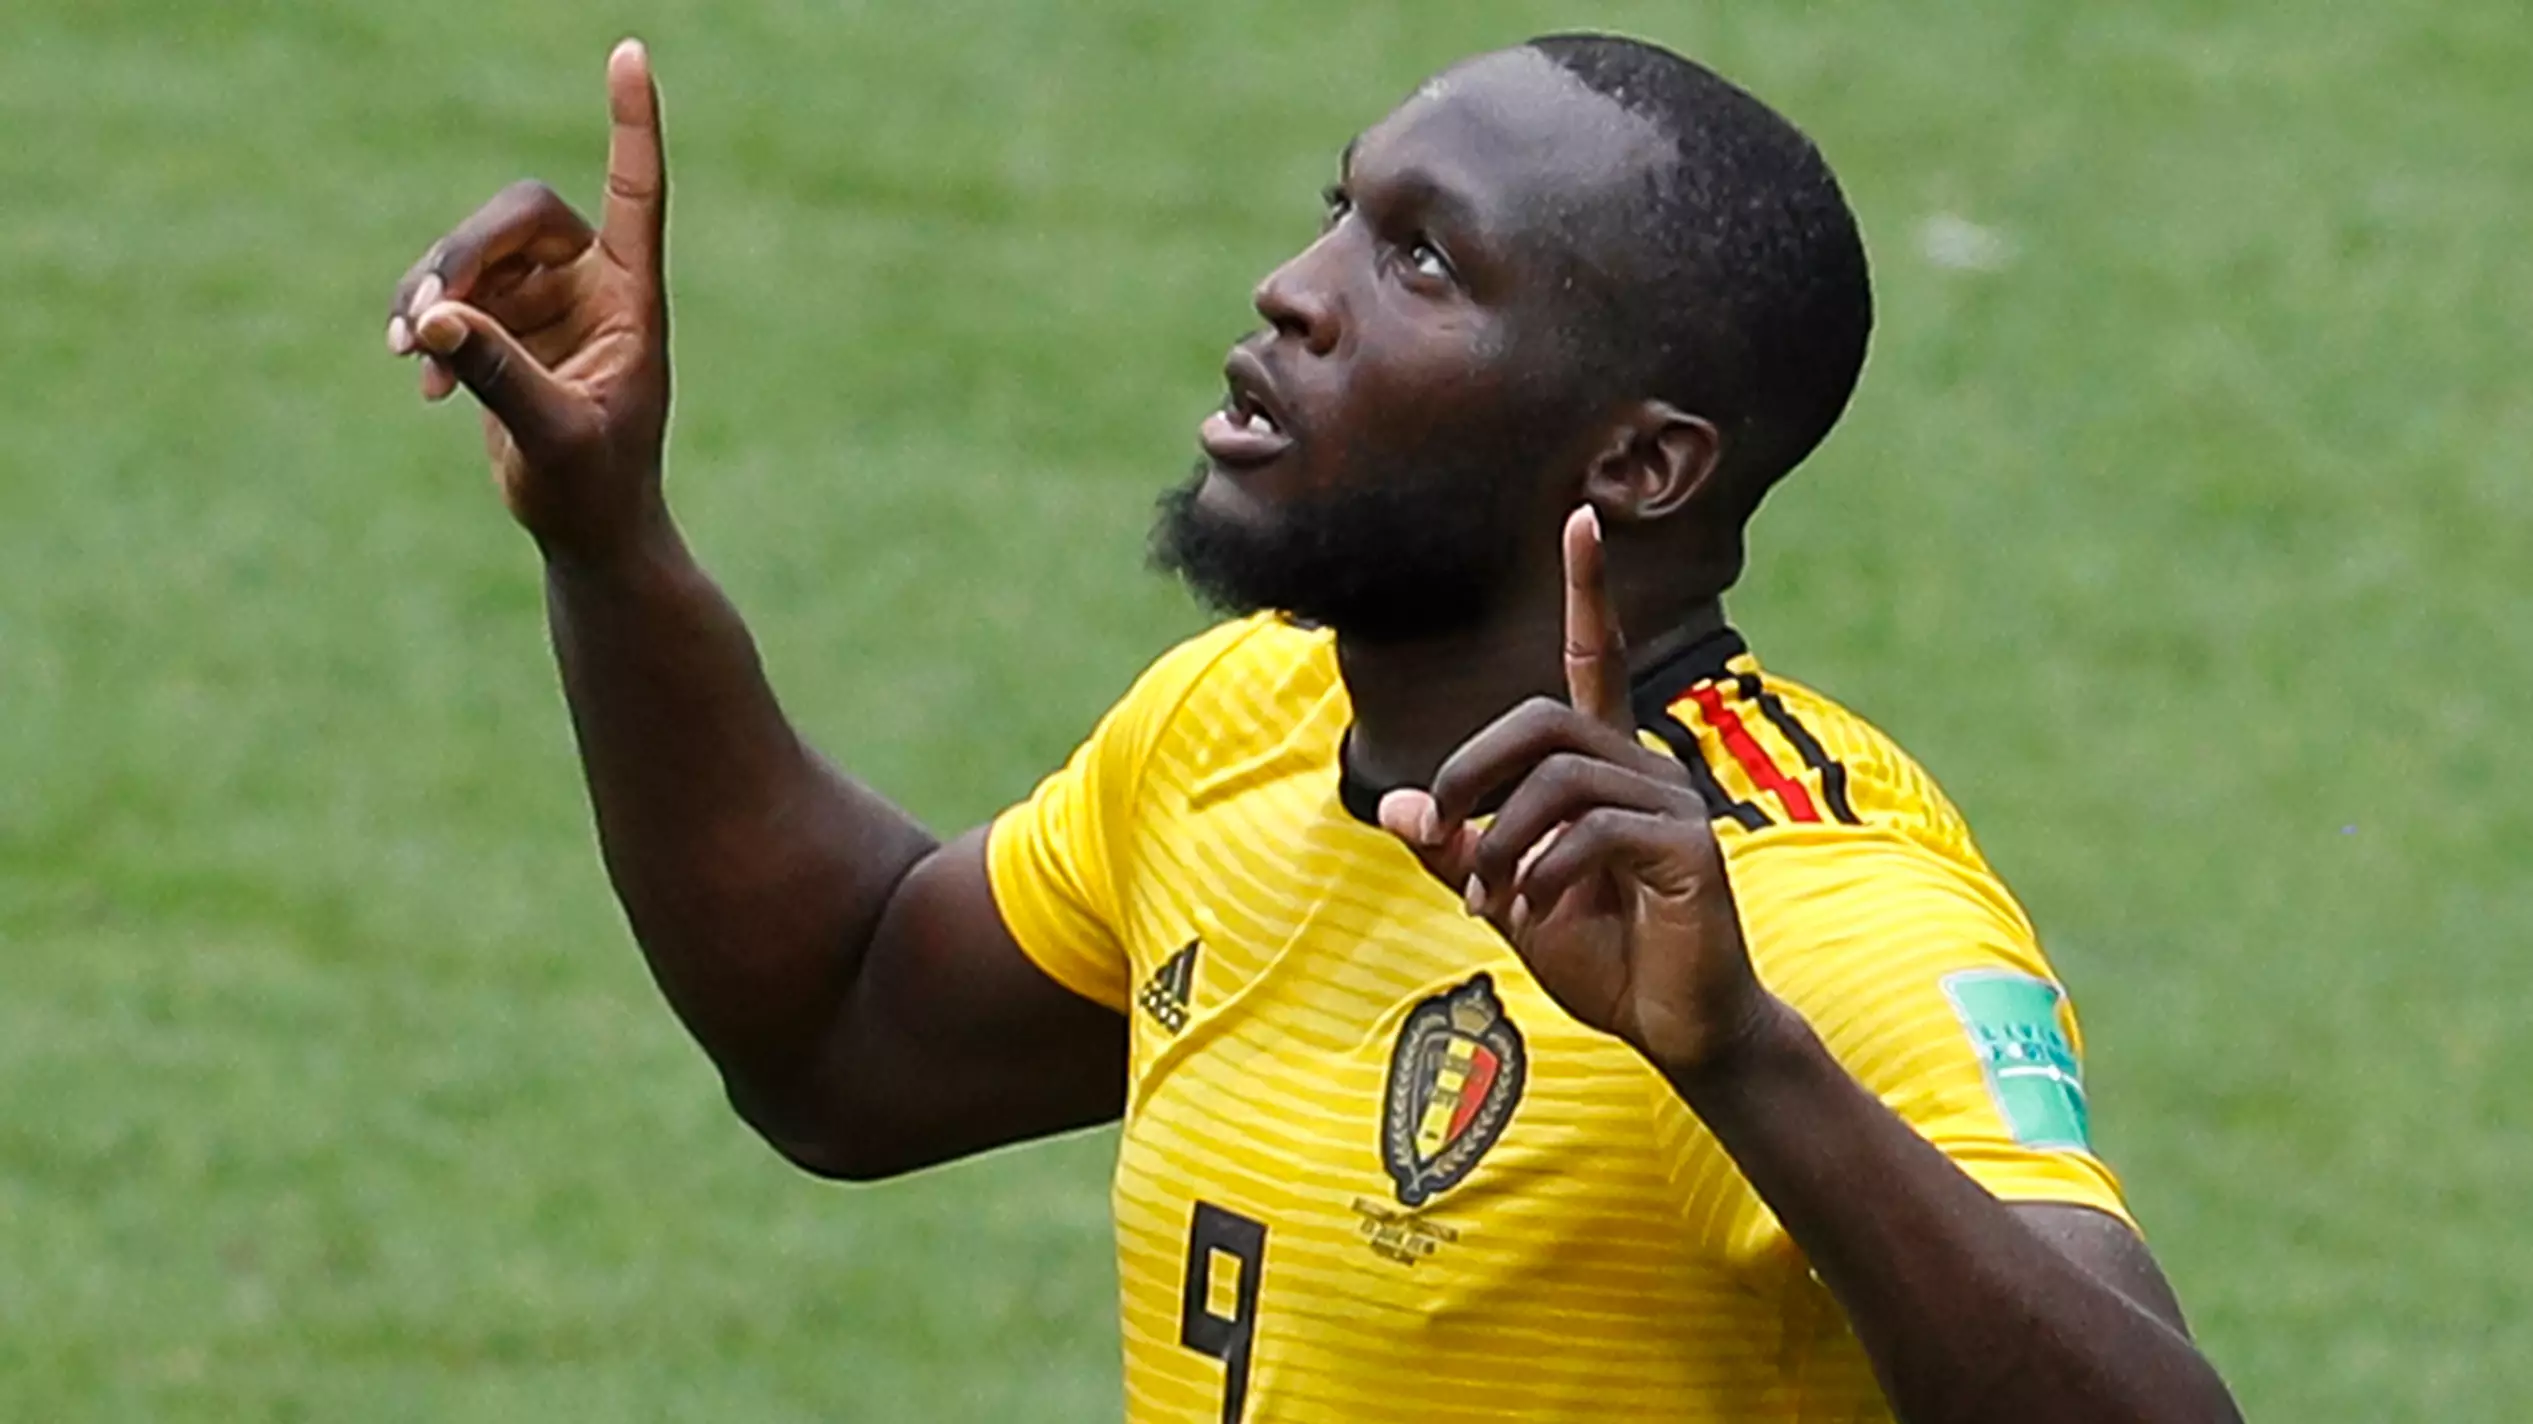 Romelu Lukaku Just Showed That There Is Space For Sportsmanship At The World Cup